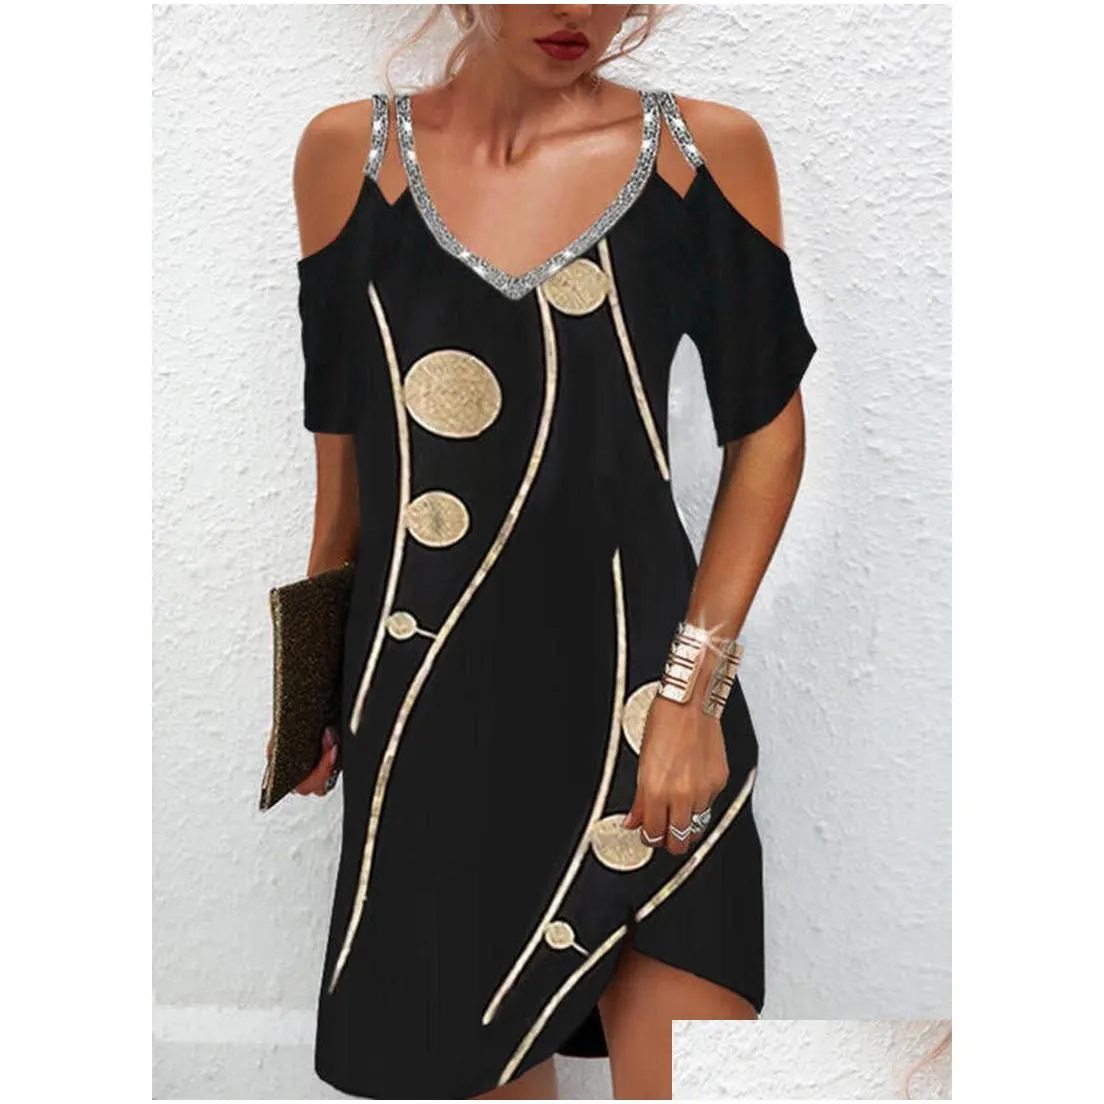 Basic & Casual Dresses Woman Dress Y Off Shoder Vintage Summer Fashion Es For Women Bodycon Party 220613 Drop Delivery Apparel Women` Dhqky